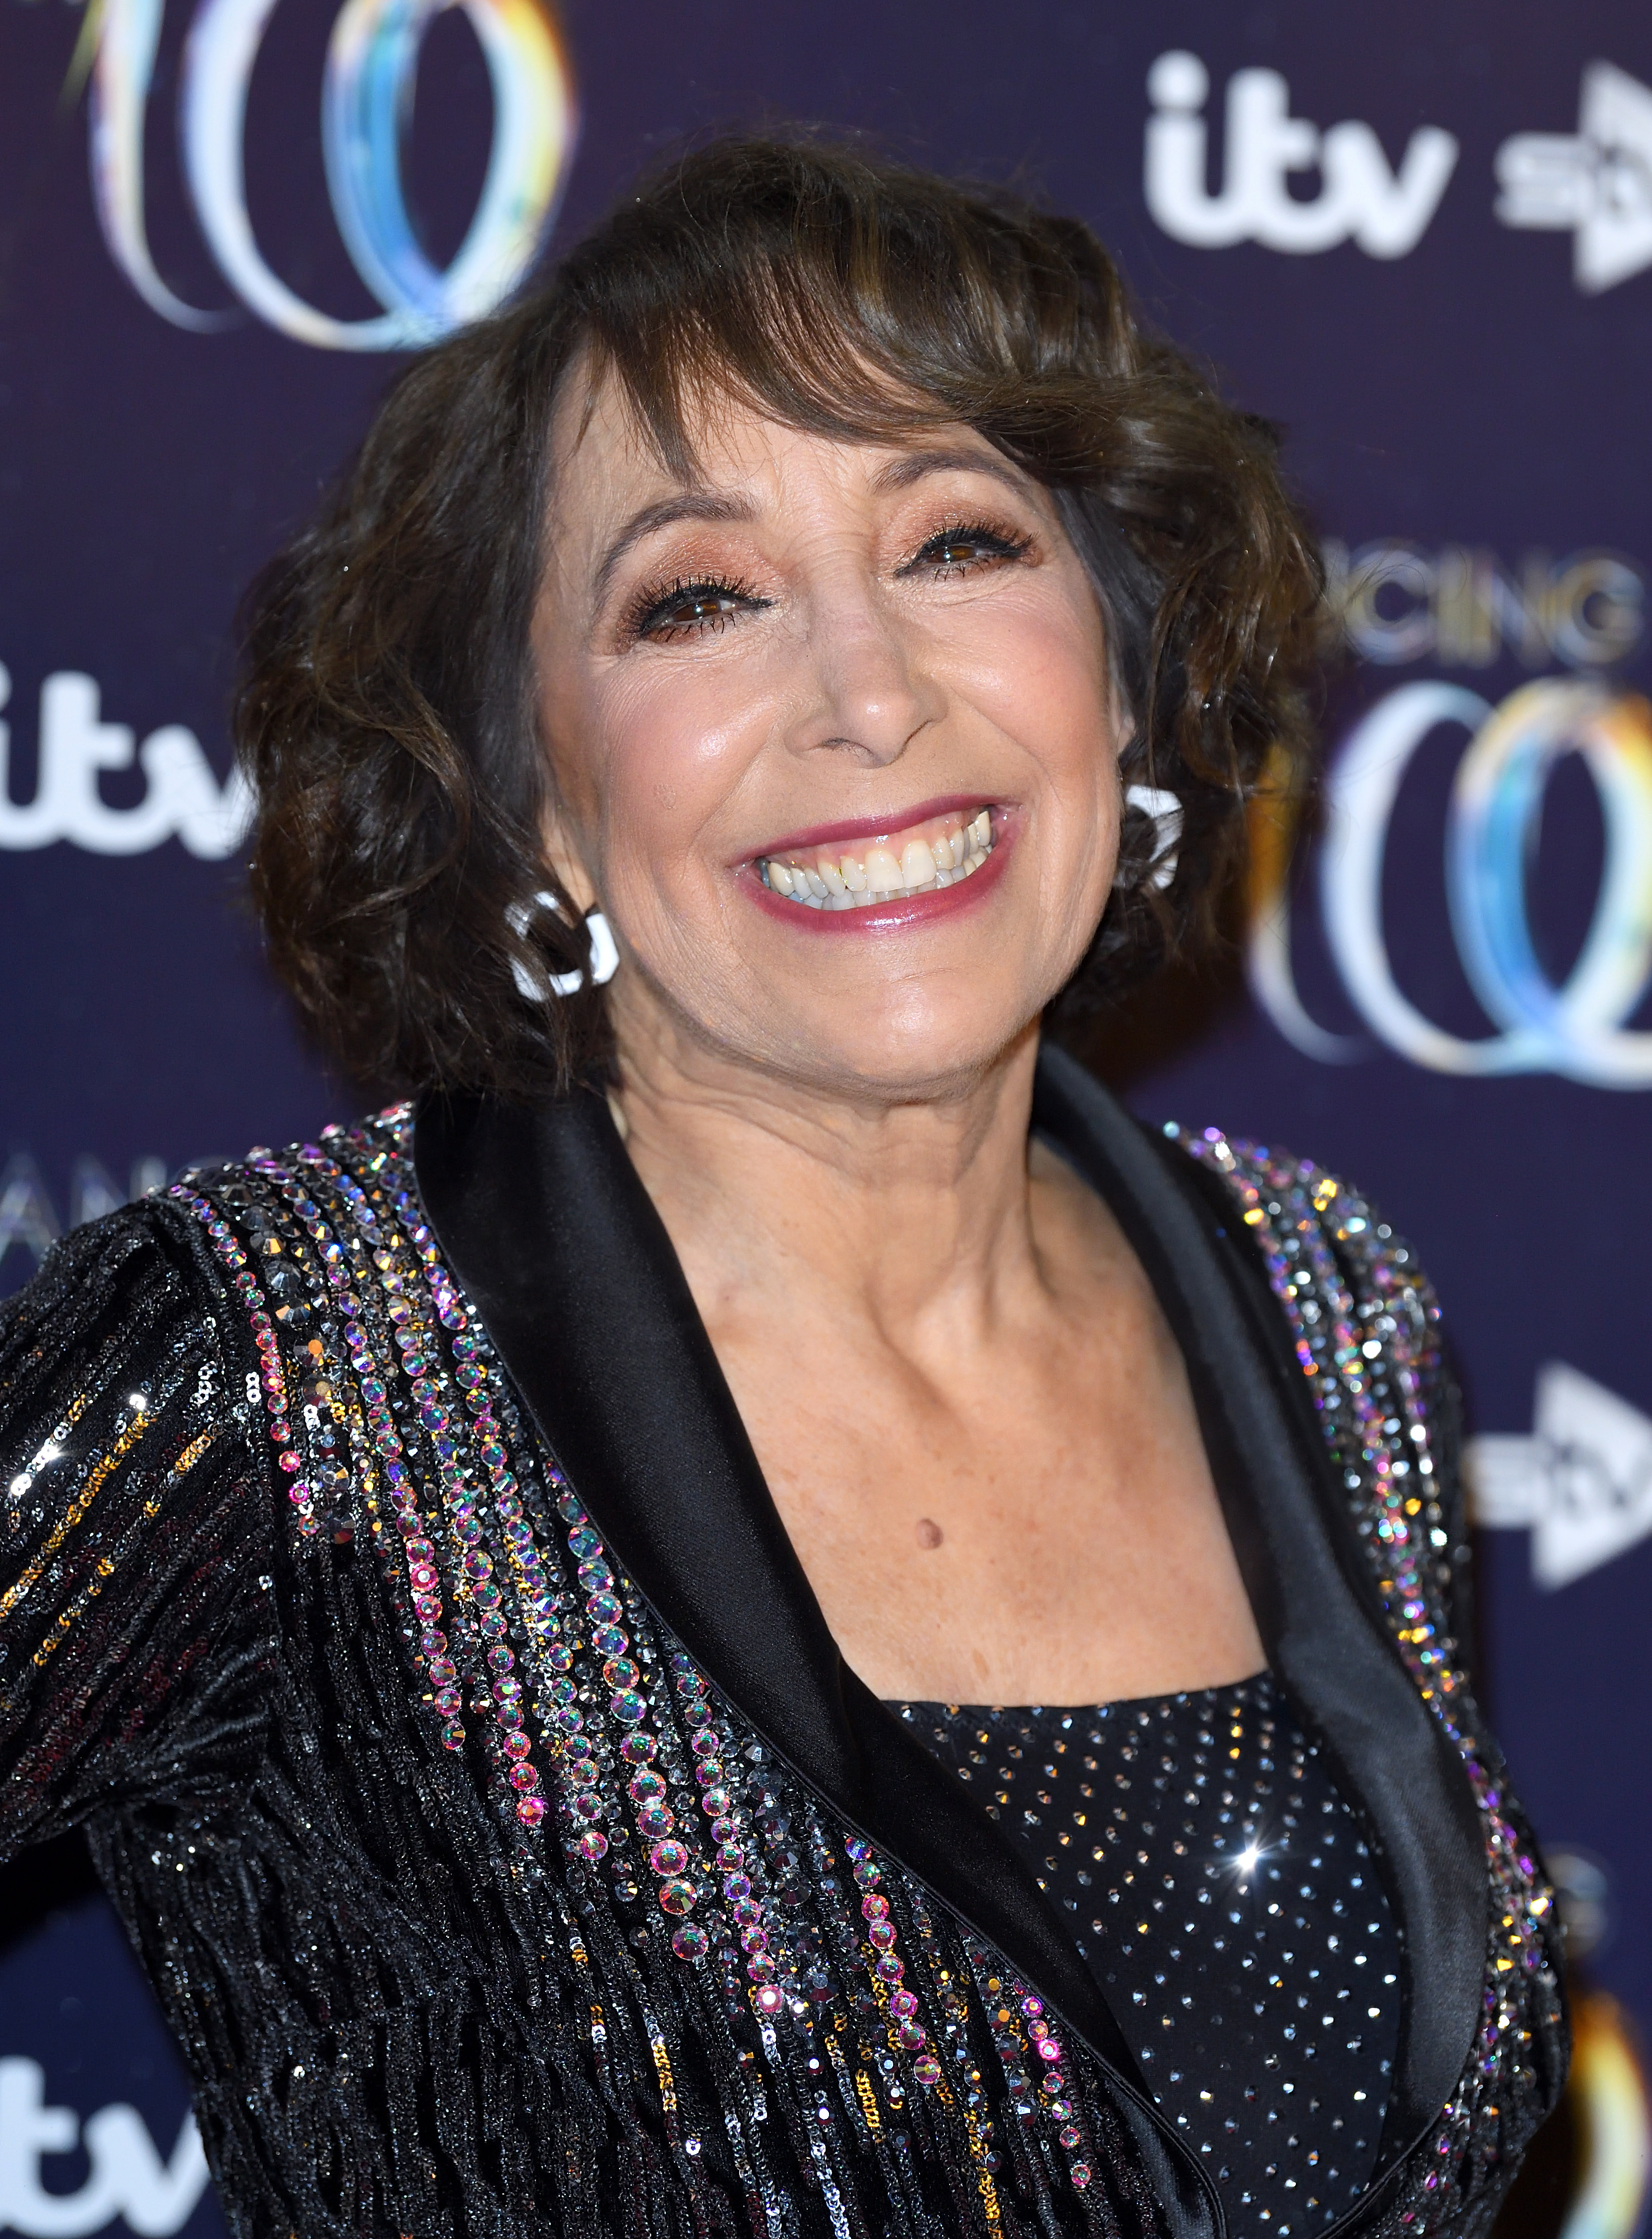 Didi Conn attends a photocall for "Dancing On Ice" at Natural History Museum Ice Rink on December 18, 2018 in London, England | Source: Getty Images